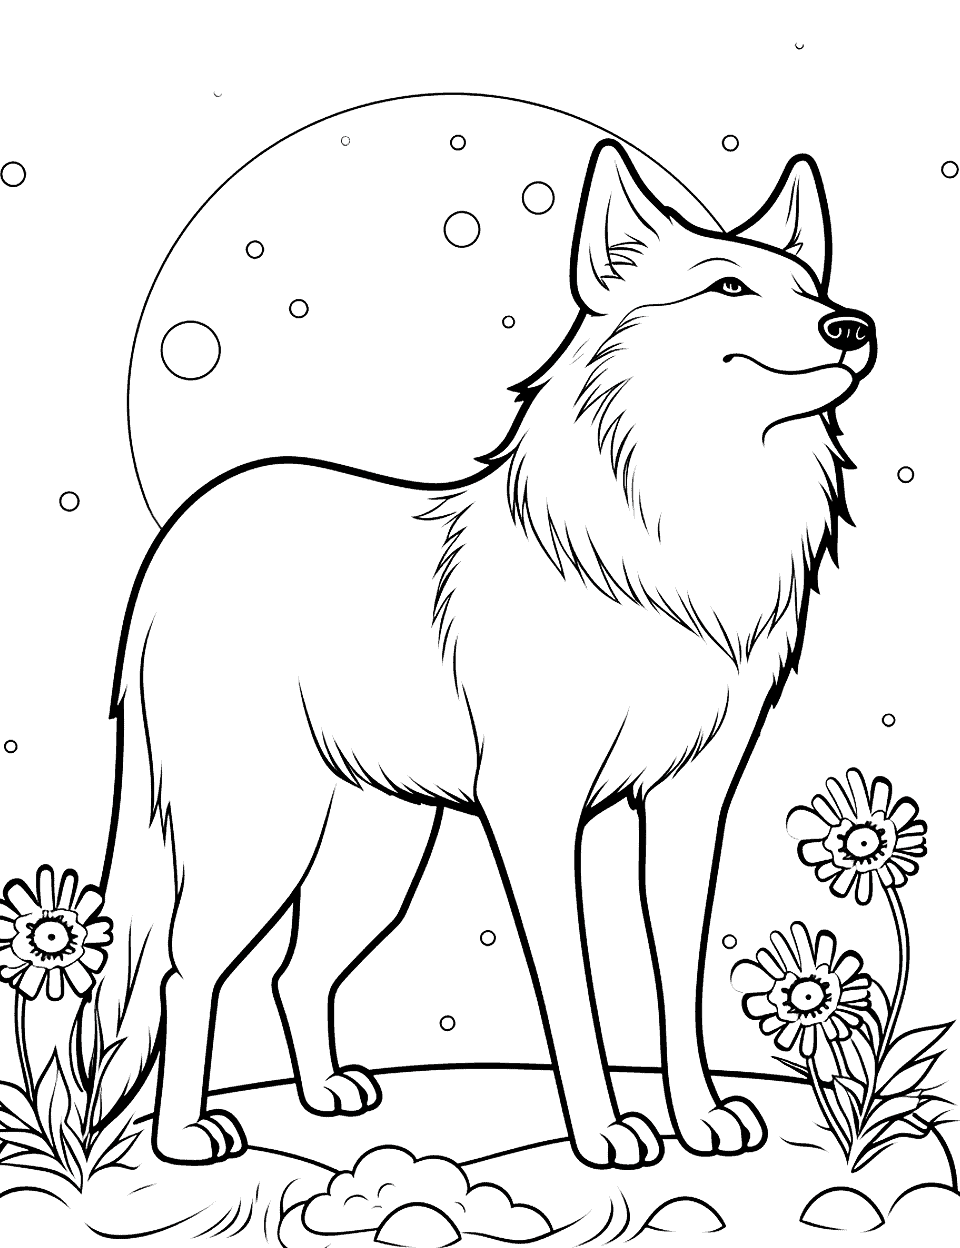 The Wolf and Moonflower Coloring Page - A wolf with glowing moonflower that blooms only at night.